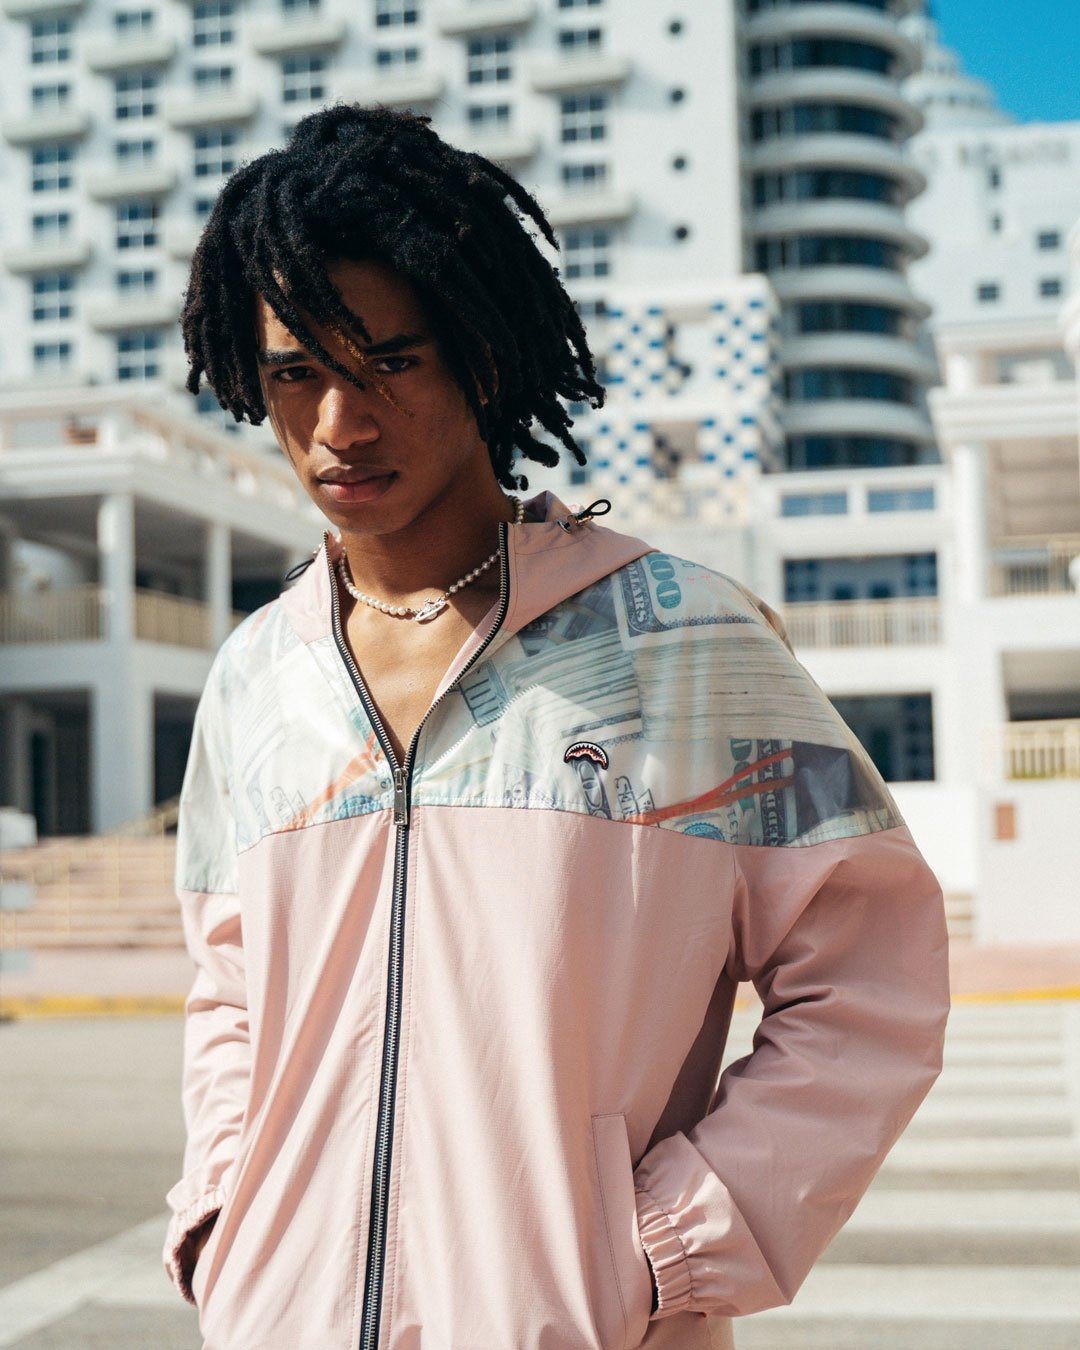 MONEY STACKS WINDBREAKER (PINK) - HIGH QUALITY AND INEXPENSIVE - MONEY STACKS WINDBREAKER (PINK) HIGH QUALITY AND INEXPENSIVE-01-8